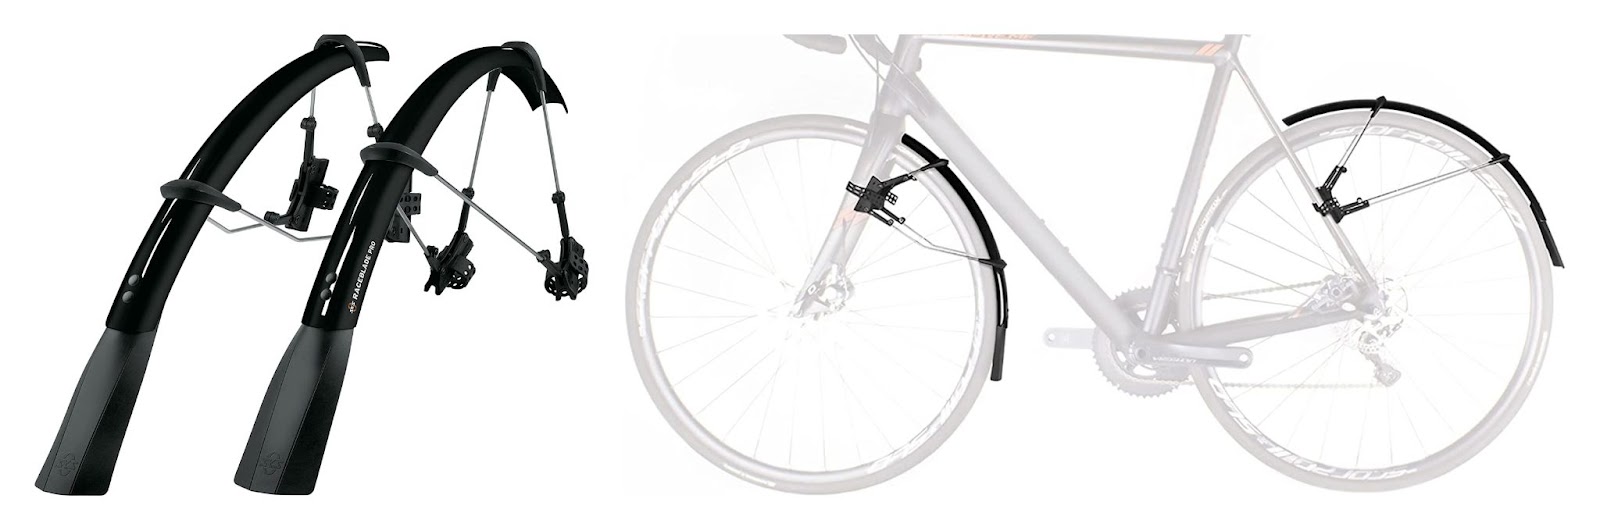 Install clip-on mudguards on your mountain bike if you would prefer lighter mudguards.